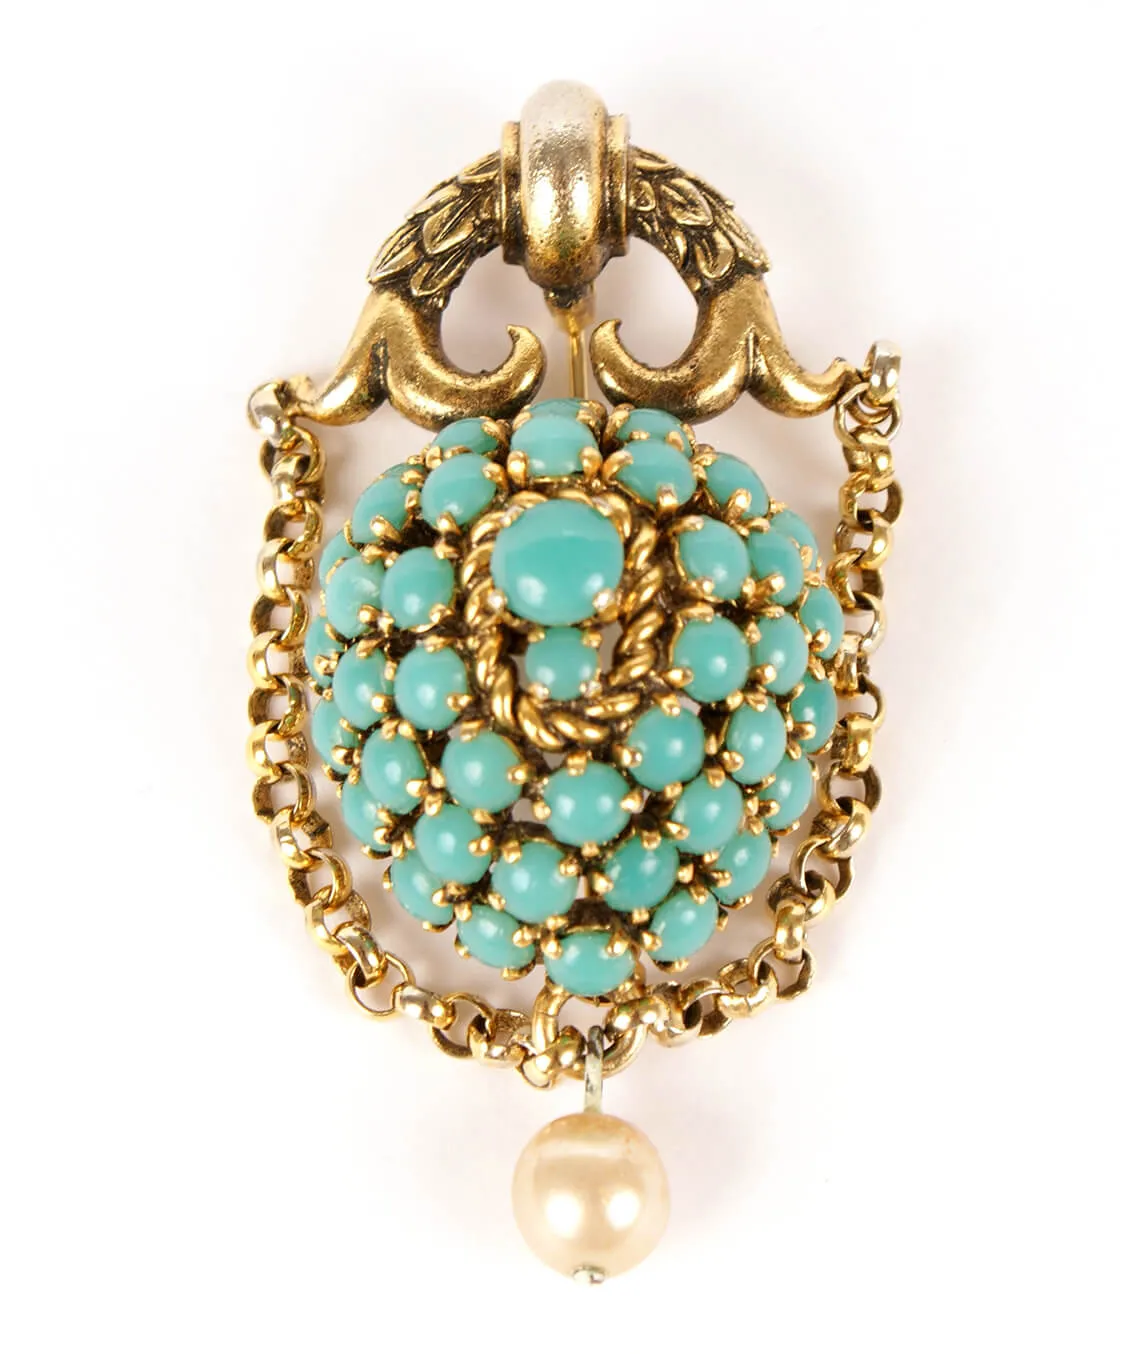 Vintage Christian Dior turquoise brooch pin